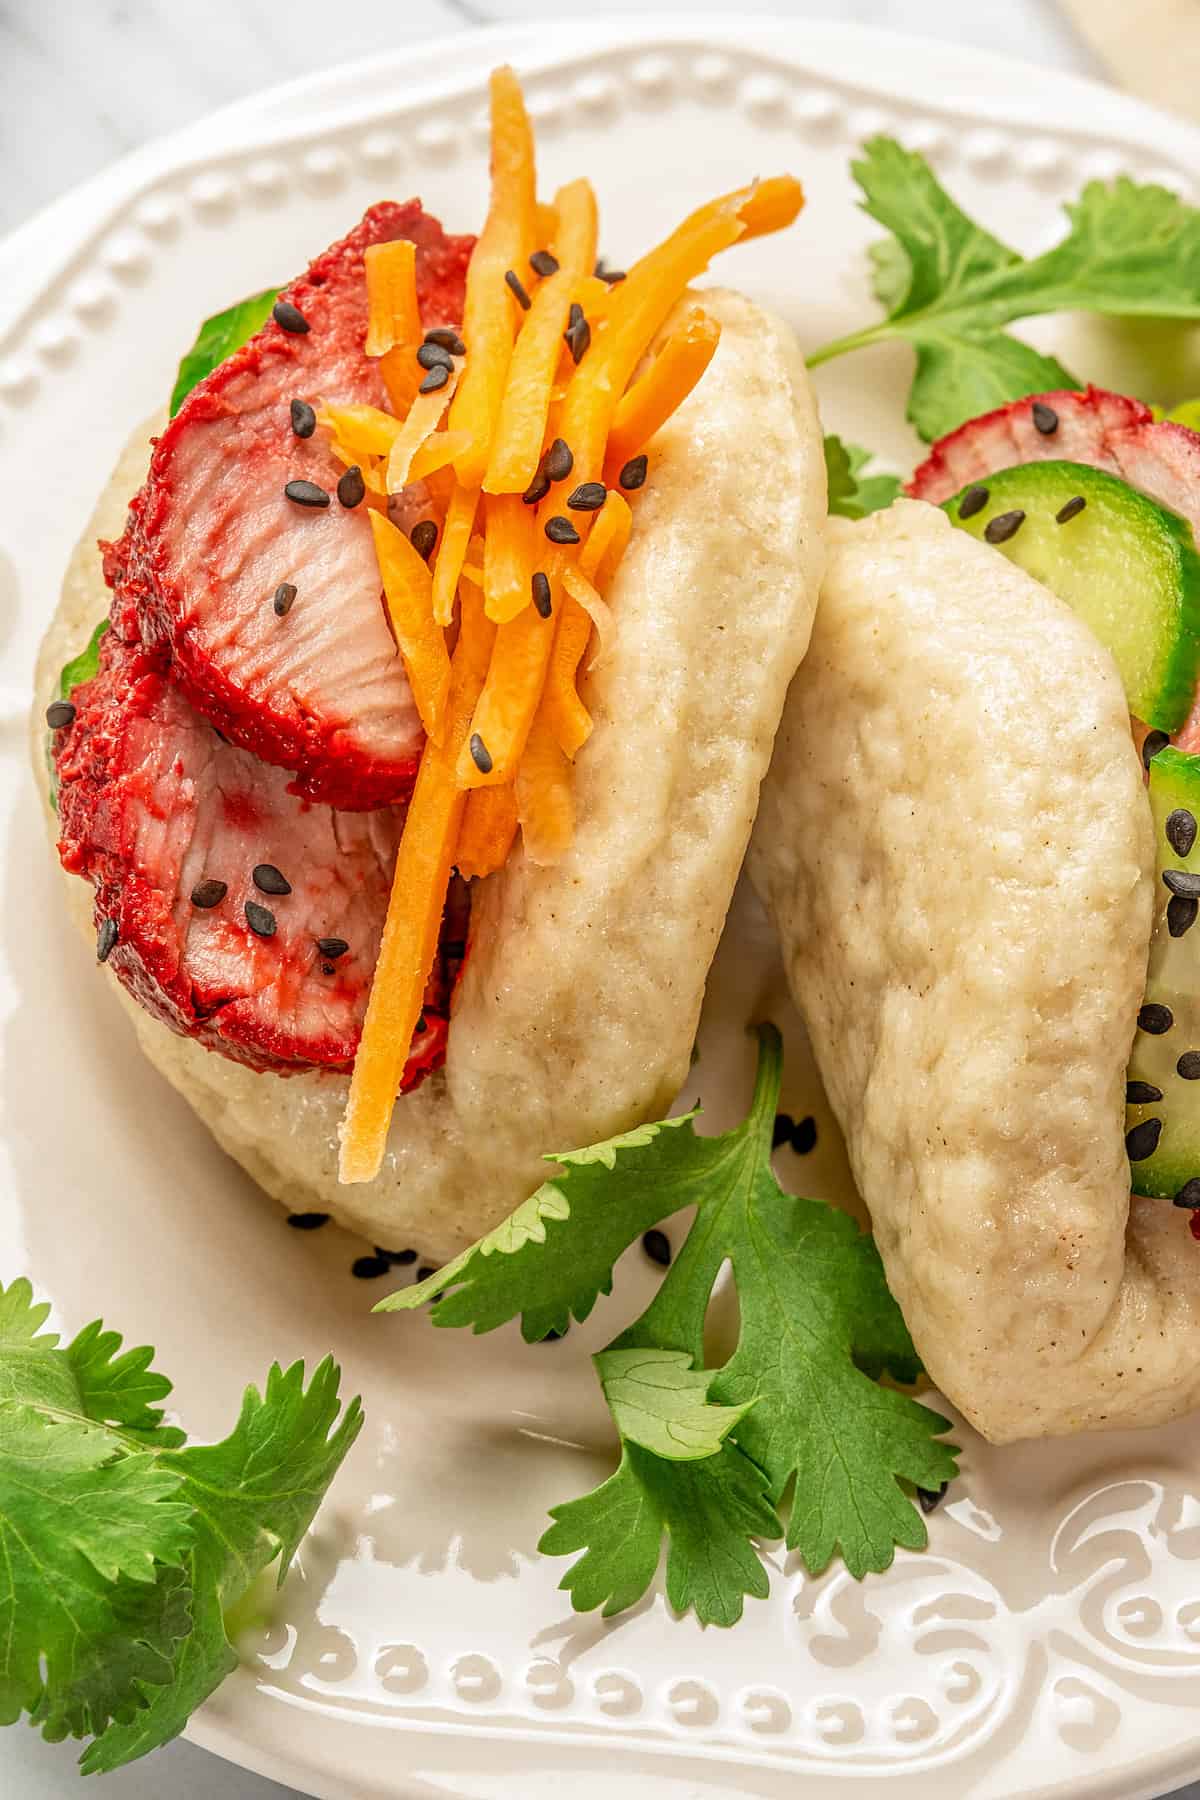 Close up of two gluten-free bao buns filled with char siu pork and veggies on a plate, garnished with coriander leaves.